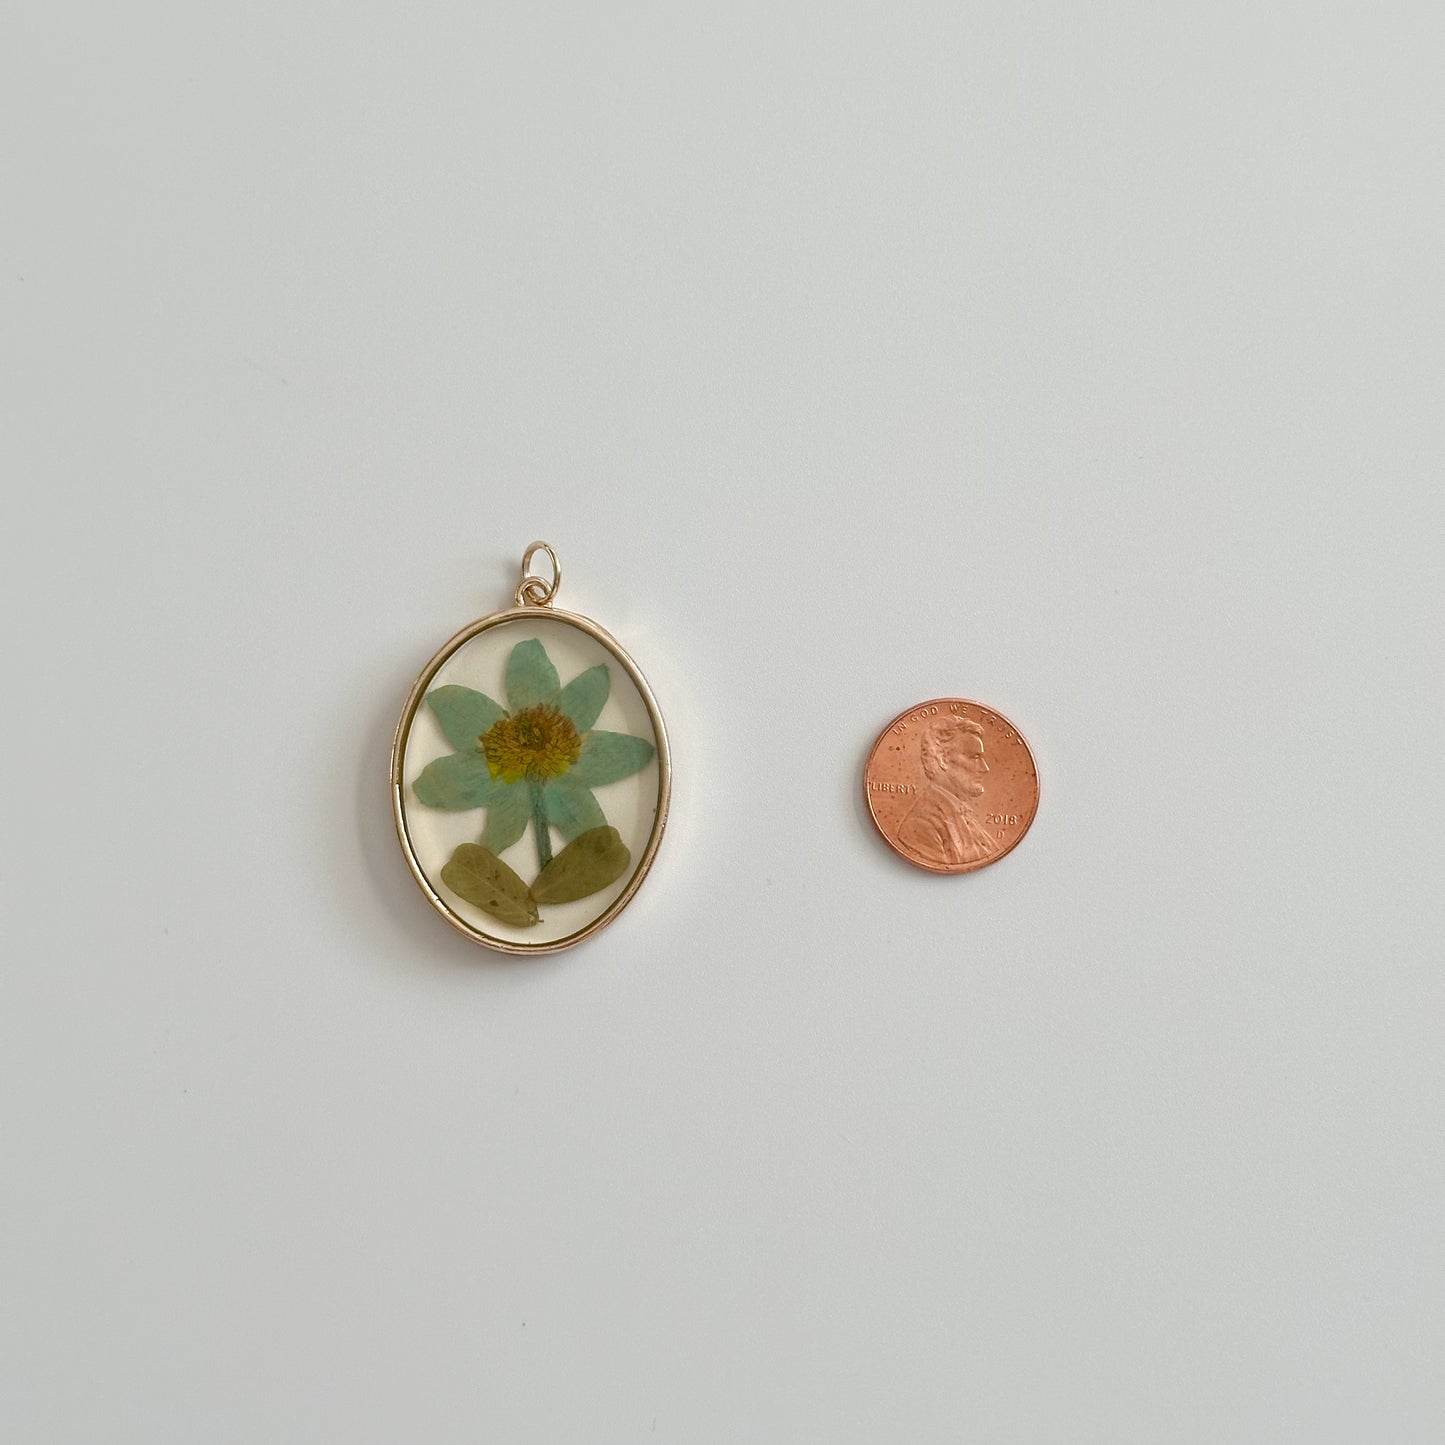 Epoxy Resin Oval Sage Real Flower Pendant Charm 40x30mm